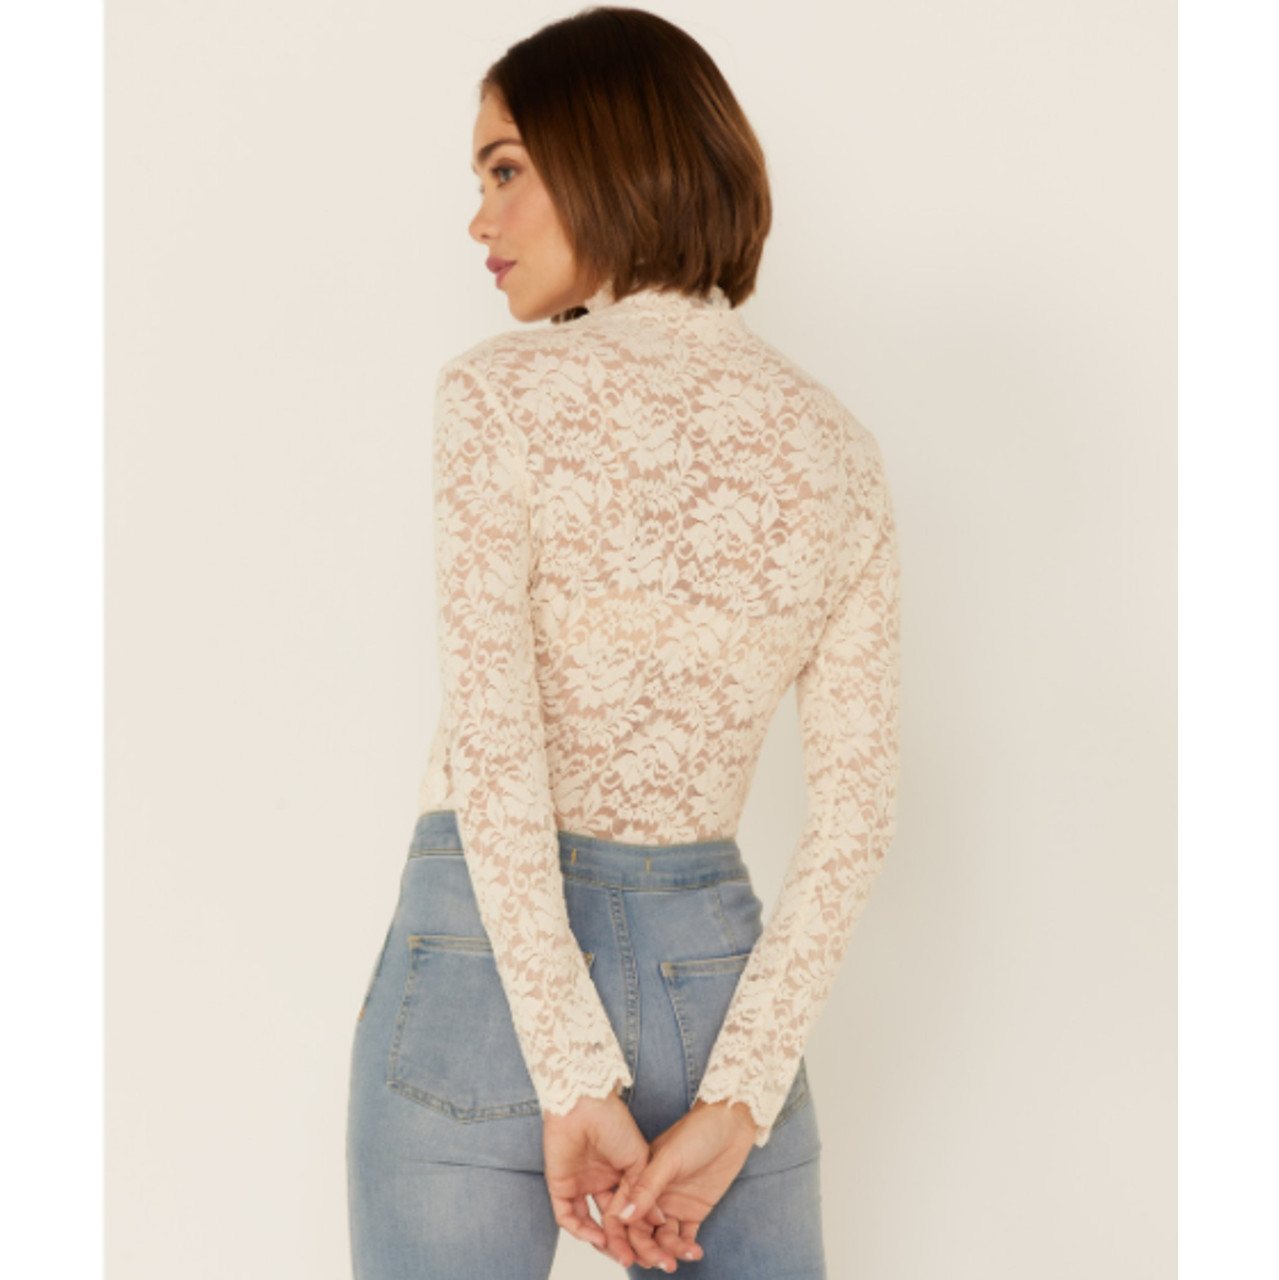 Molly Bracken Long Sleeve Off White Lace Top